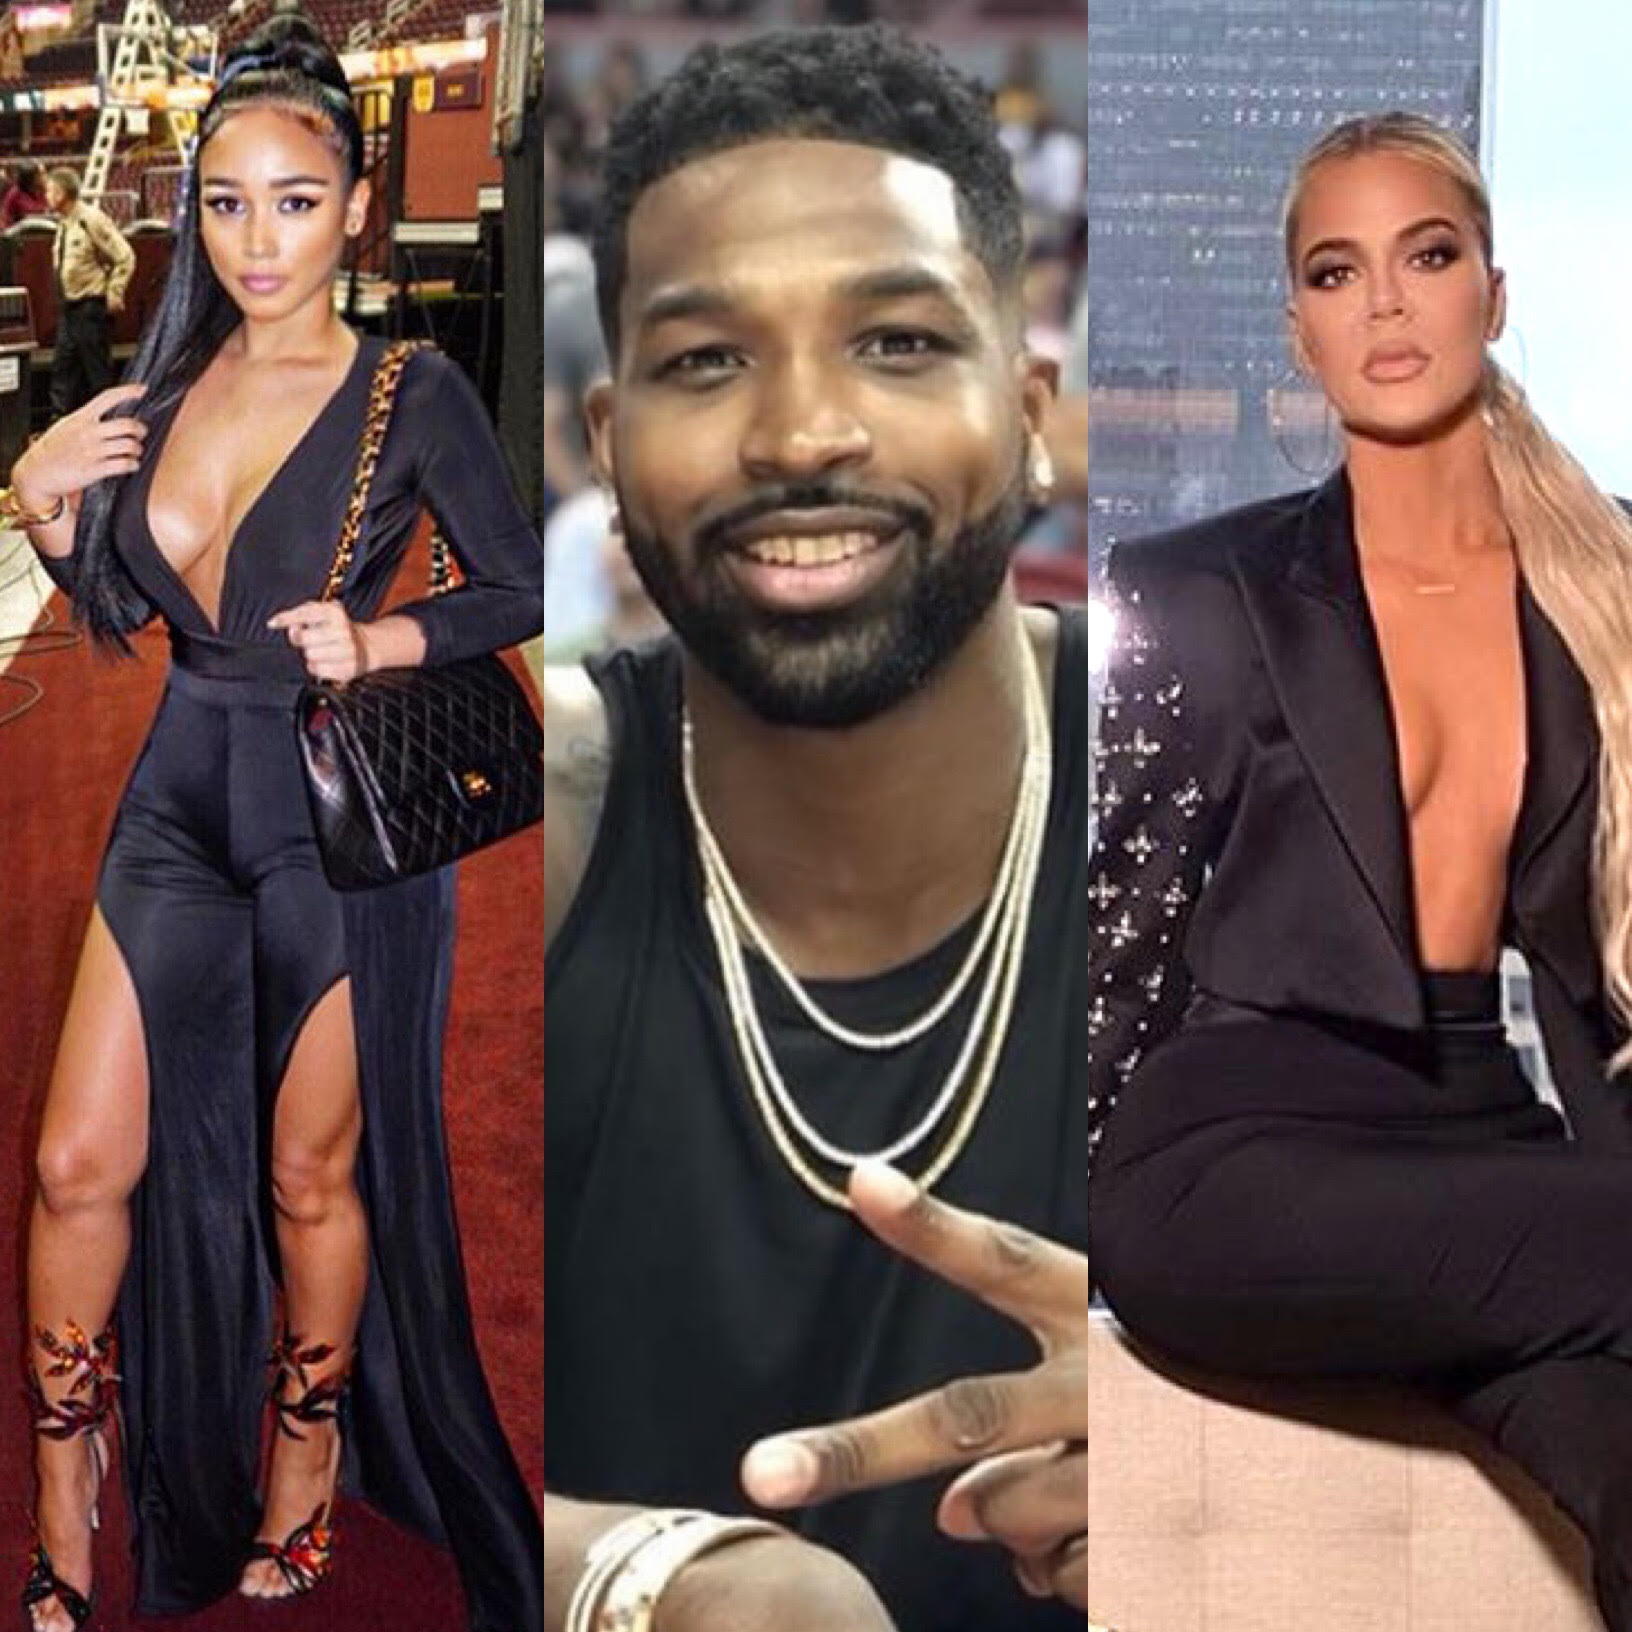 Jordan Craig Tristan Thompson Cheated On Her W/ Khloe Kardashian In Court Docs, It Caused Complications In Her Pregnancy theJasmineBRAND